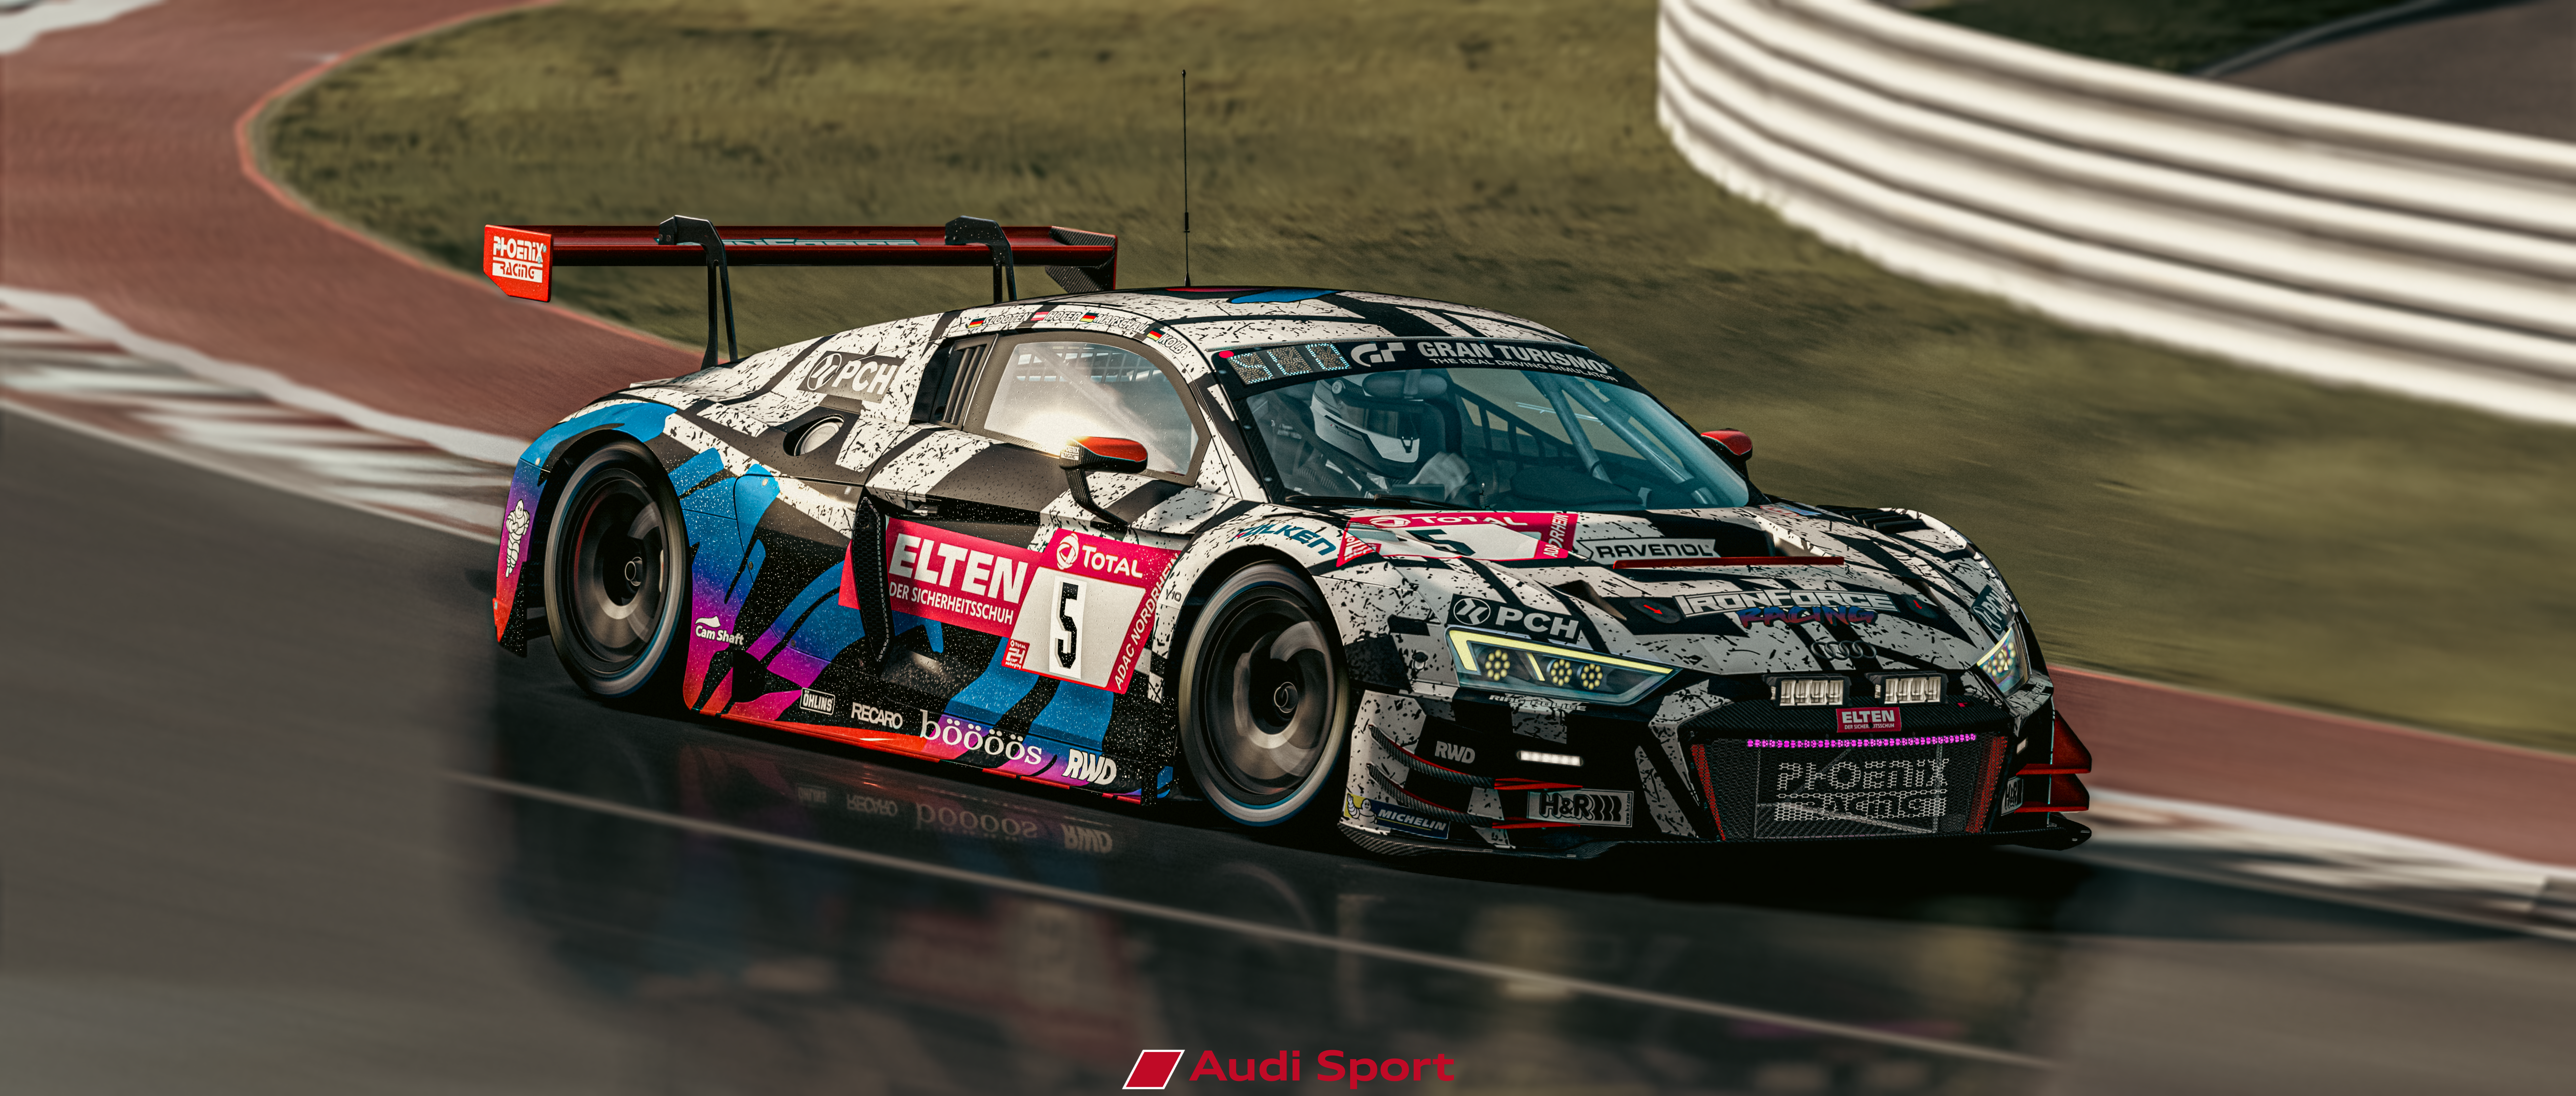 Audi Audi R8 Race Cars Race Tracks Assetto Corsa PC Gaming Car Reflection Front Angle View Helmet CG 7680x3269